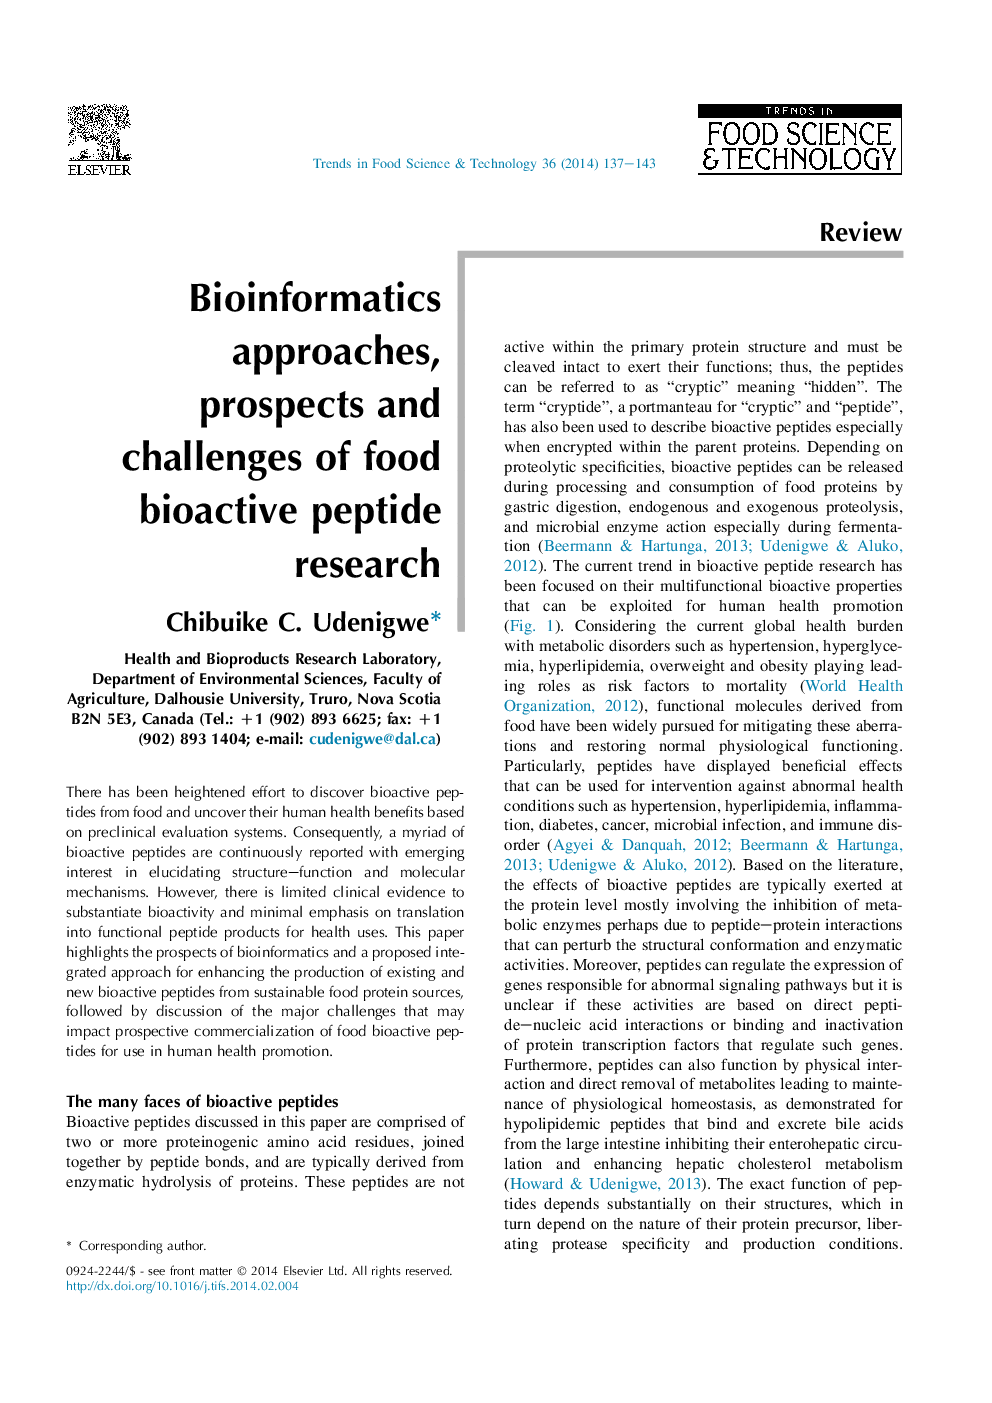 Bioinformatics approaches, prospects and challenges of food bioactive peptide research